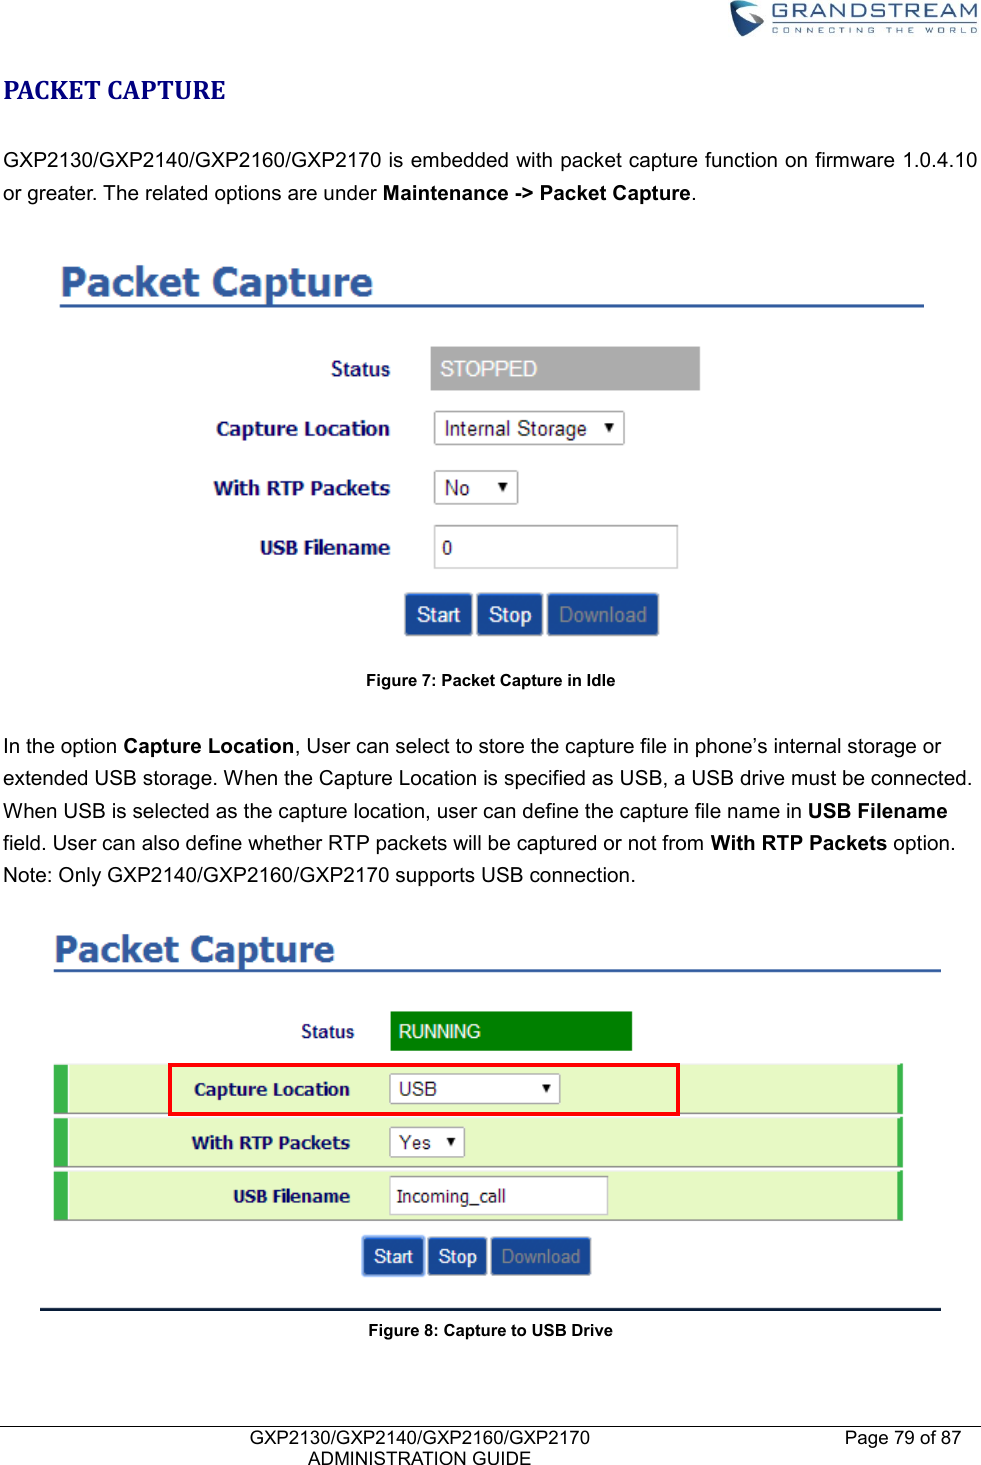    GXP2130/GXP2140/GXP2160/GXP2170   ADMINISTRATION GUIDE Page 79 of 87     PACKET CAPTURE  GXP2130/GXP2140/GXP2160/GXP2170 is embedded with packet capture function on firmware 1.0.4.10 or greater. The related options are under Maintenance -&gt; Packet Capture.     Figure 7: Packet Capture in Idle  In the option Capture Location, User can select to store the capture file in phone’s internal storage or extended USB storage. When the Capture Location is specified as USB, a USB drive must be connected. When USB is selected as the capture location, user can define the capture file name in USB Filename field. User can also define whether RTP packets will be captured or not from With RTP Packets option.   Note: Only GXP2140/GXP2160/GXP2170 supports USB connection.  Figure 8: Capture to USB Drive 